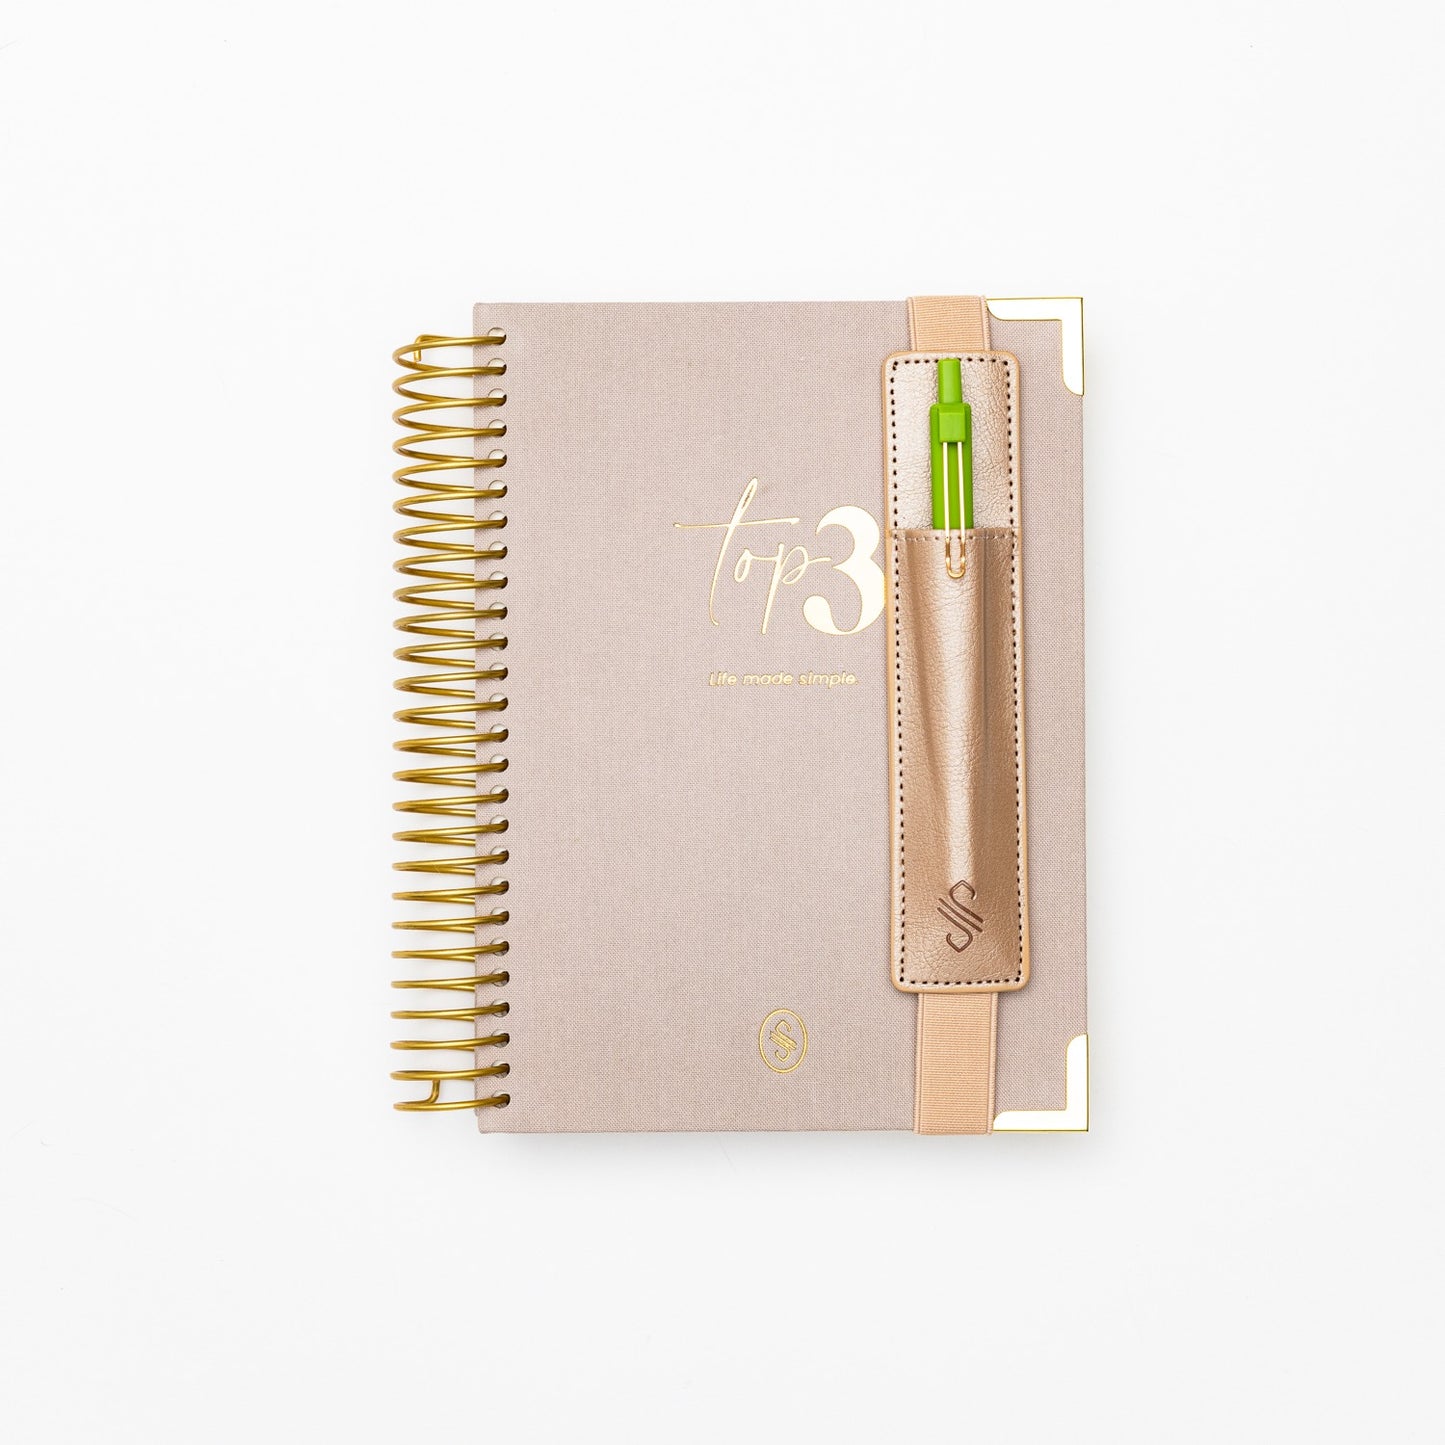 Top 3 Notebook, Taupe